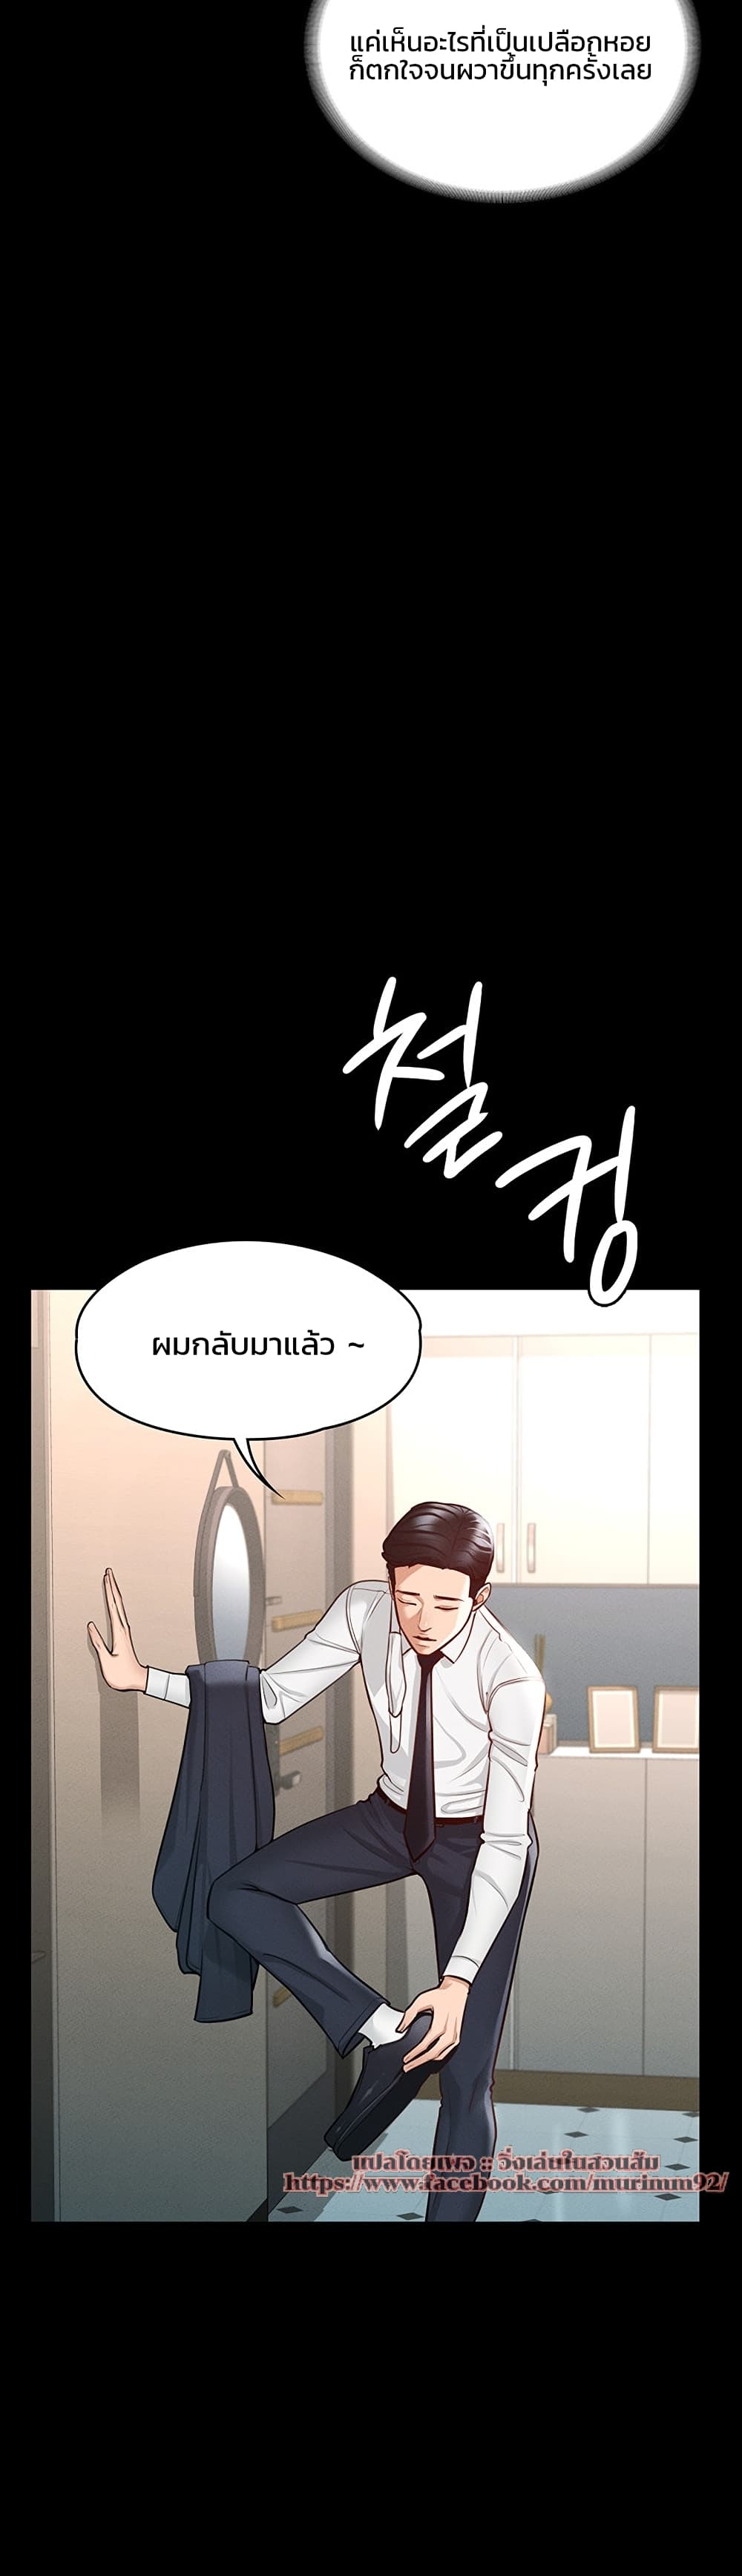 Workplace Manager Privileges ตอนที่ 4 ภาพ 6